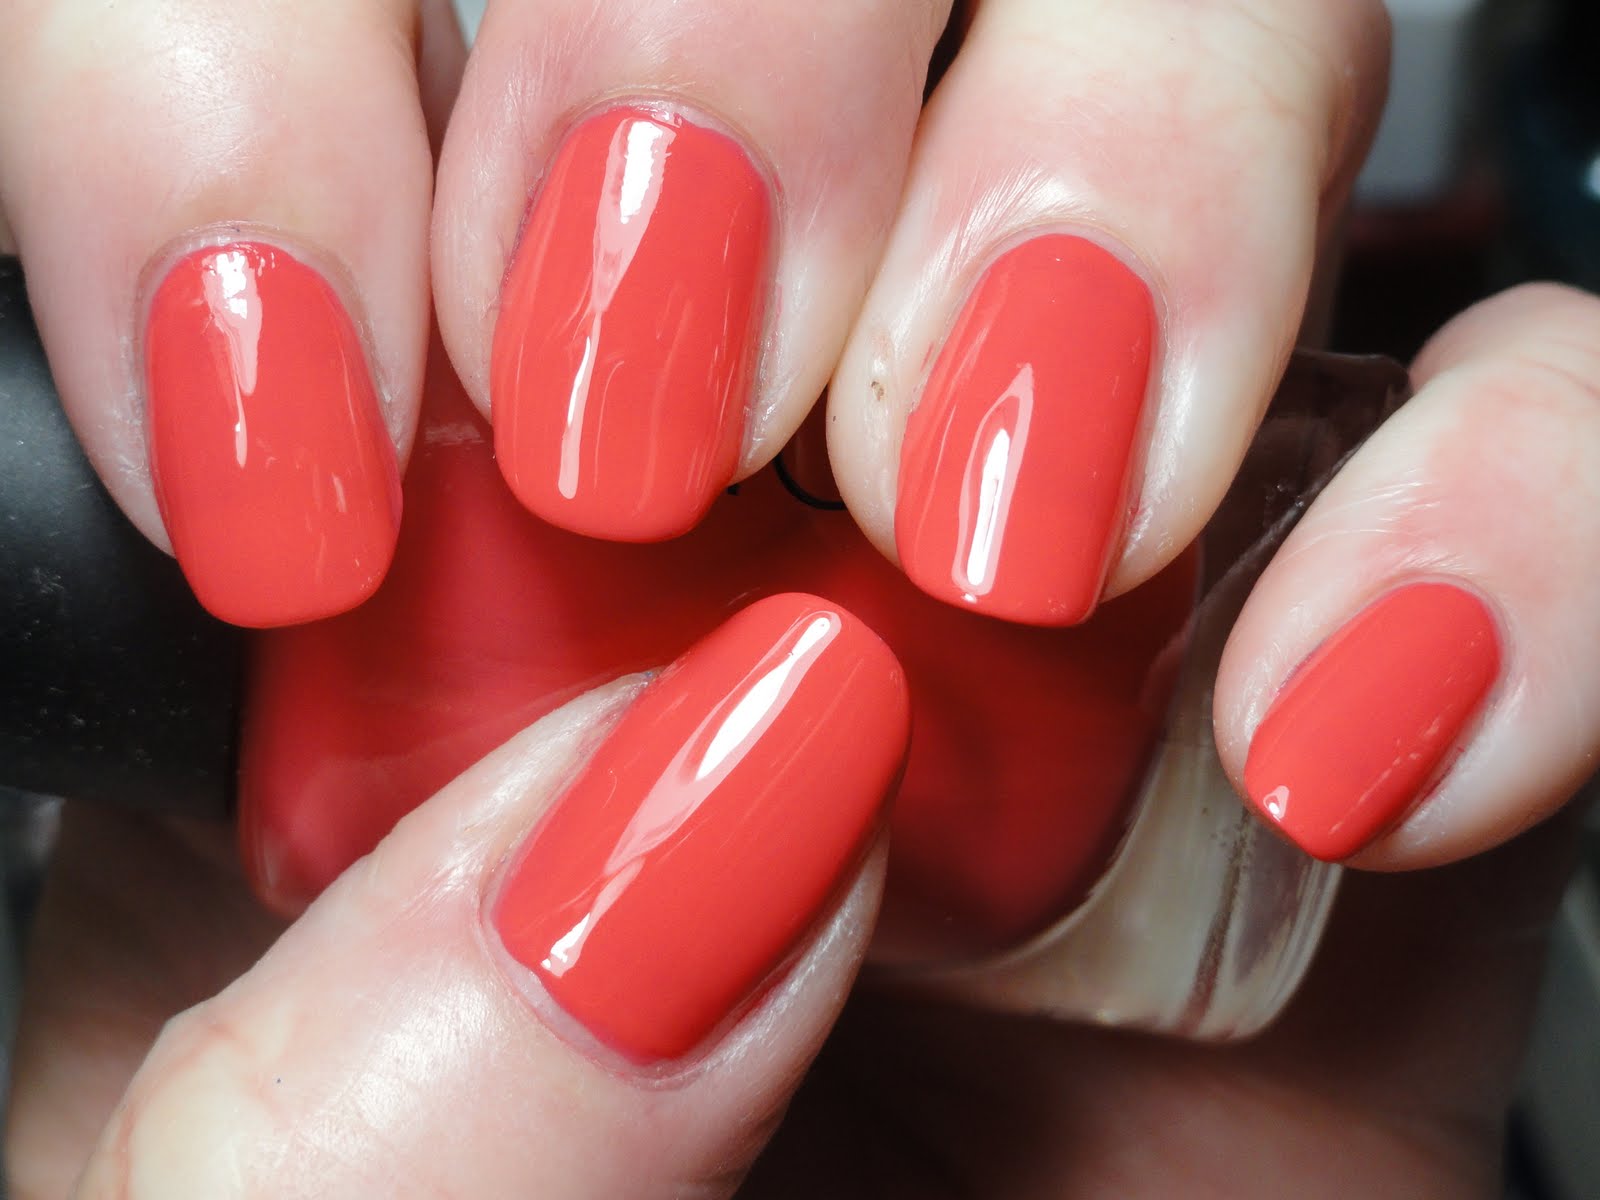 3. OPI Nail Lacquer - "Cosmic Coral" - wide 5